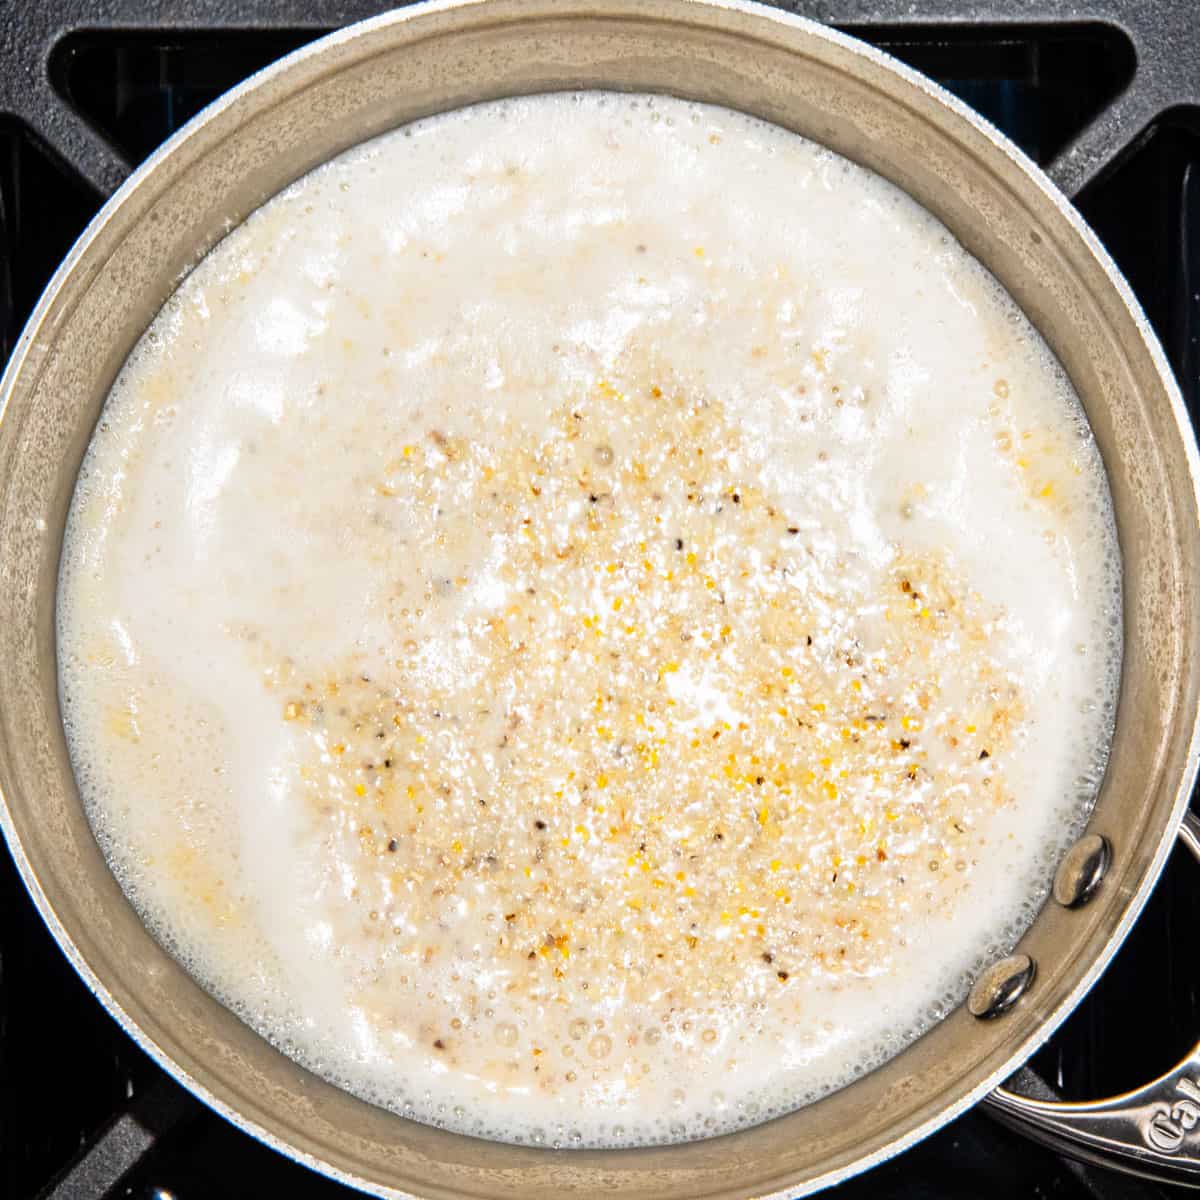 Grits cooking in a pot.